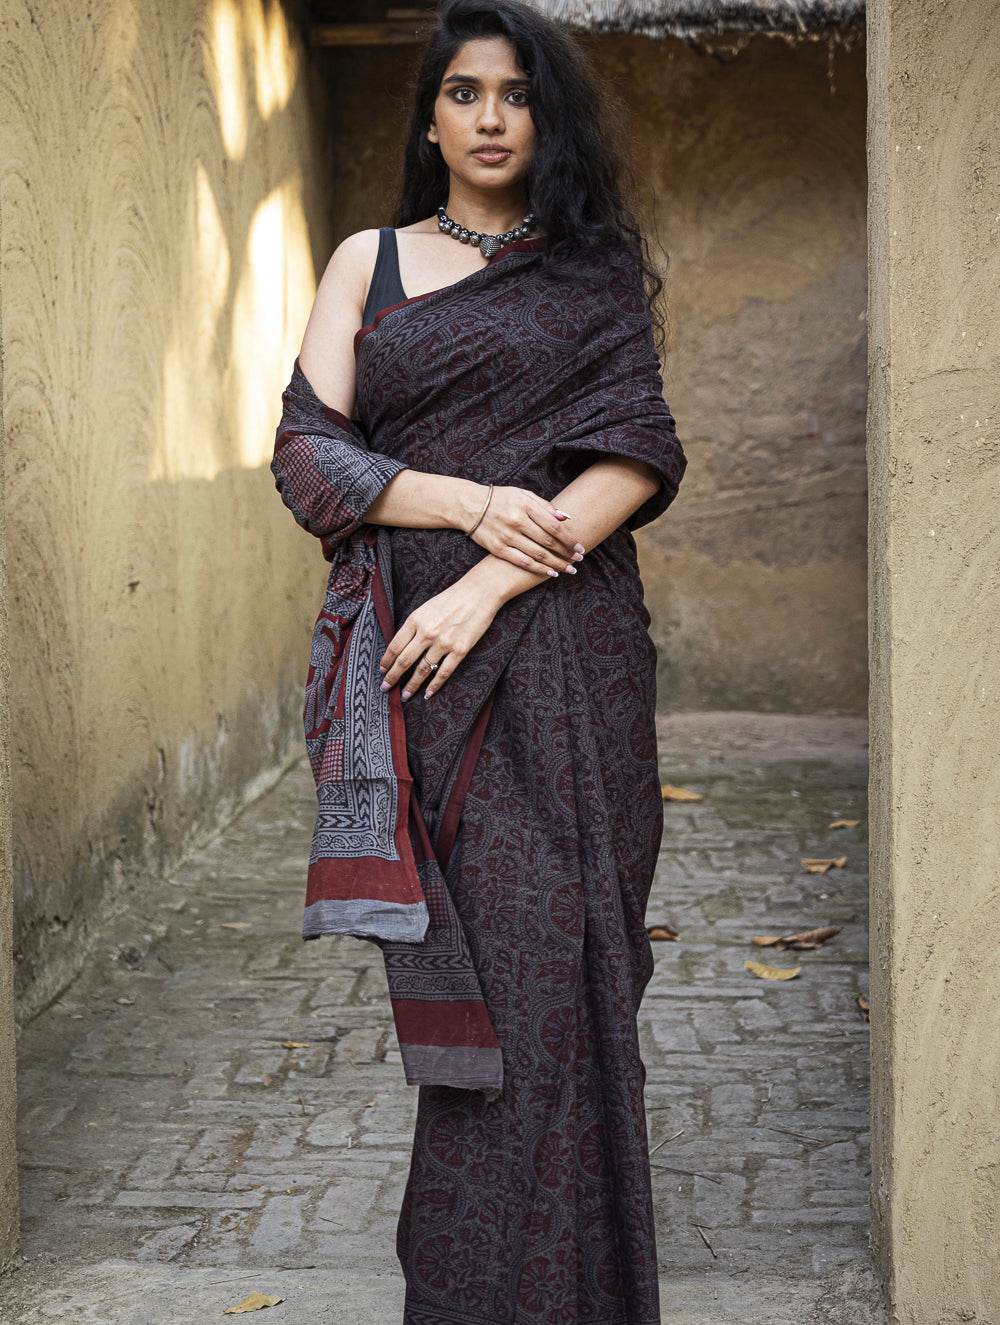 Load image into Gallery viewer, Exclusive Bagh Hand Block Printed Cotton Saree - Grey Ornate